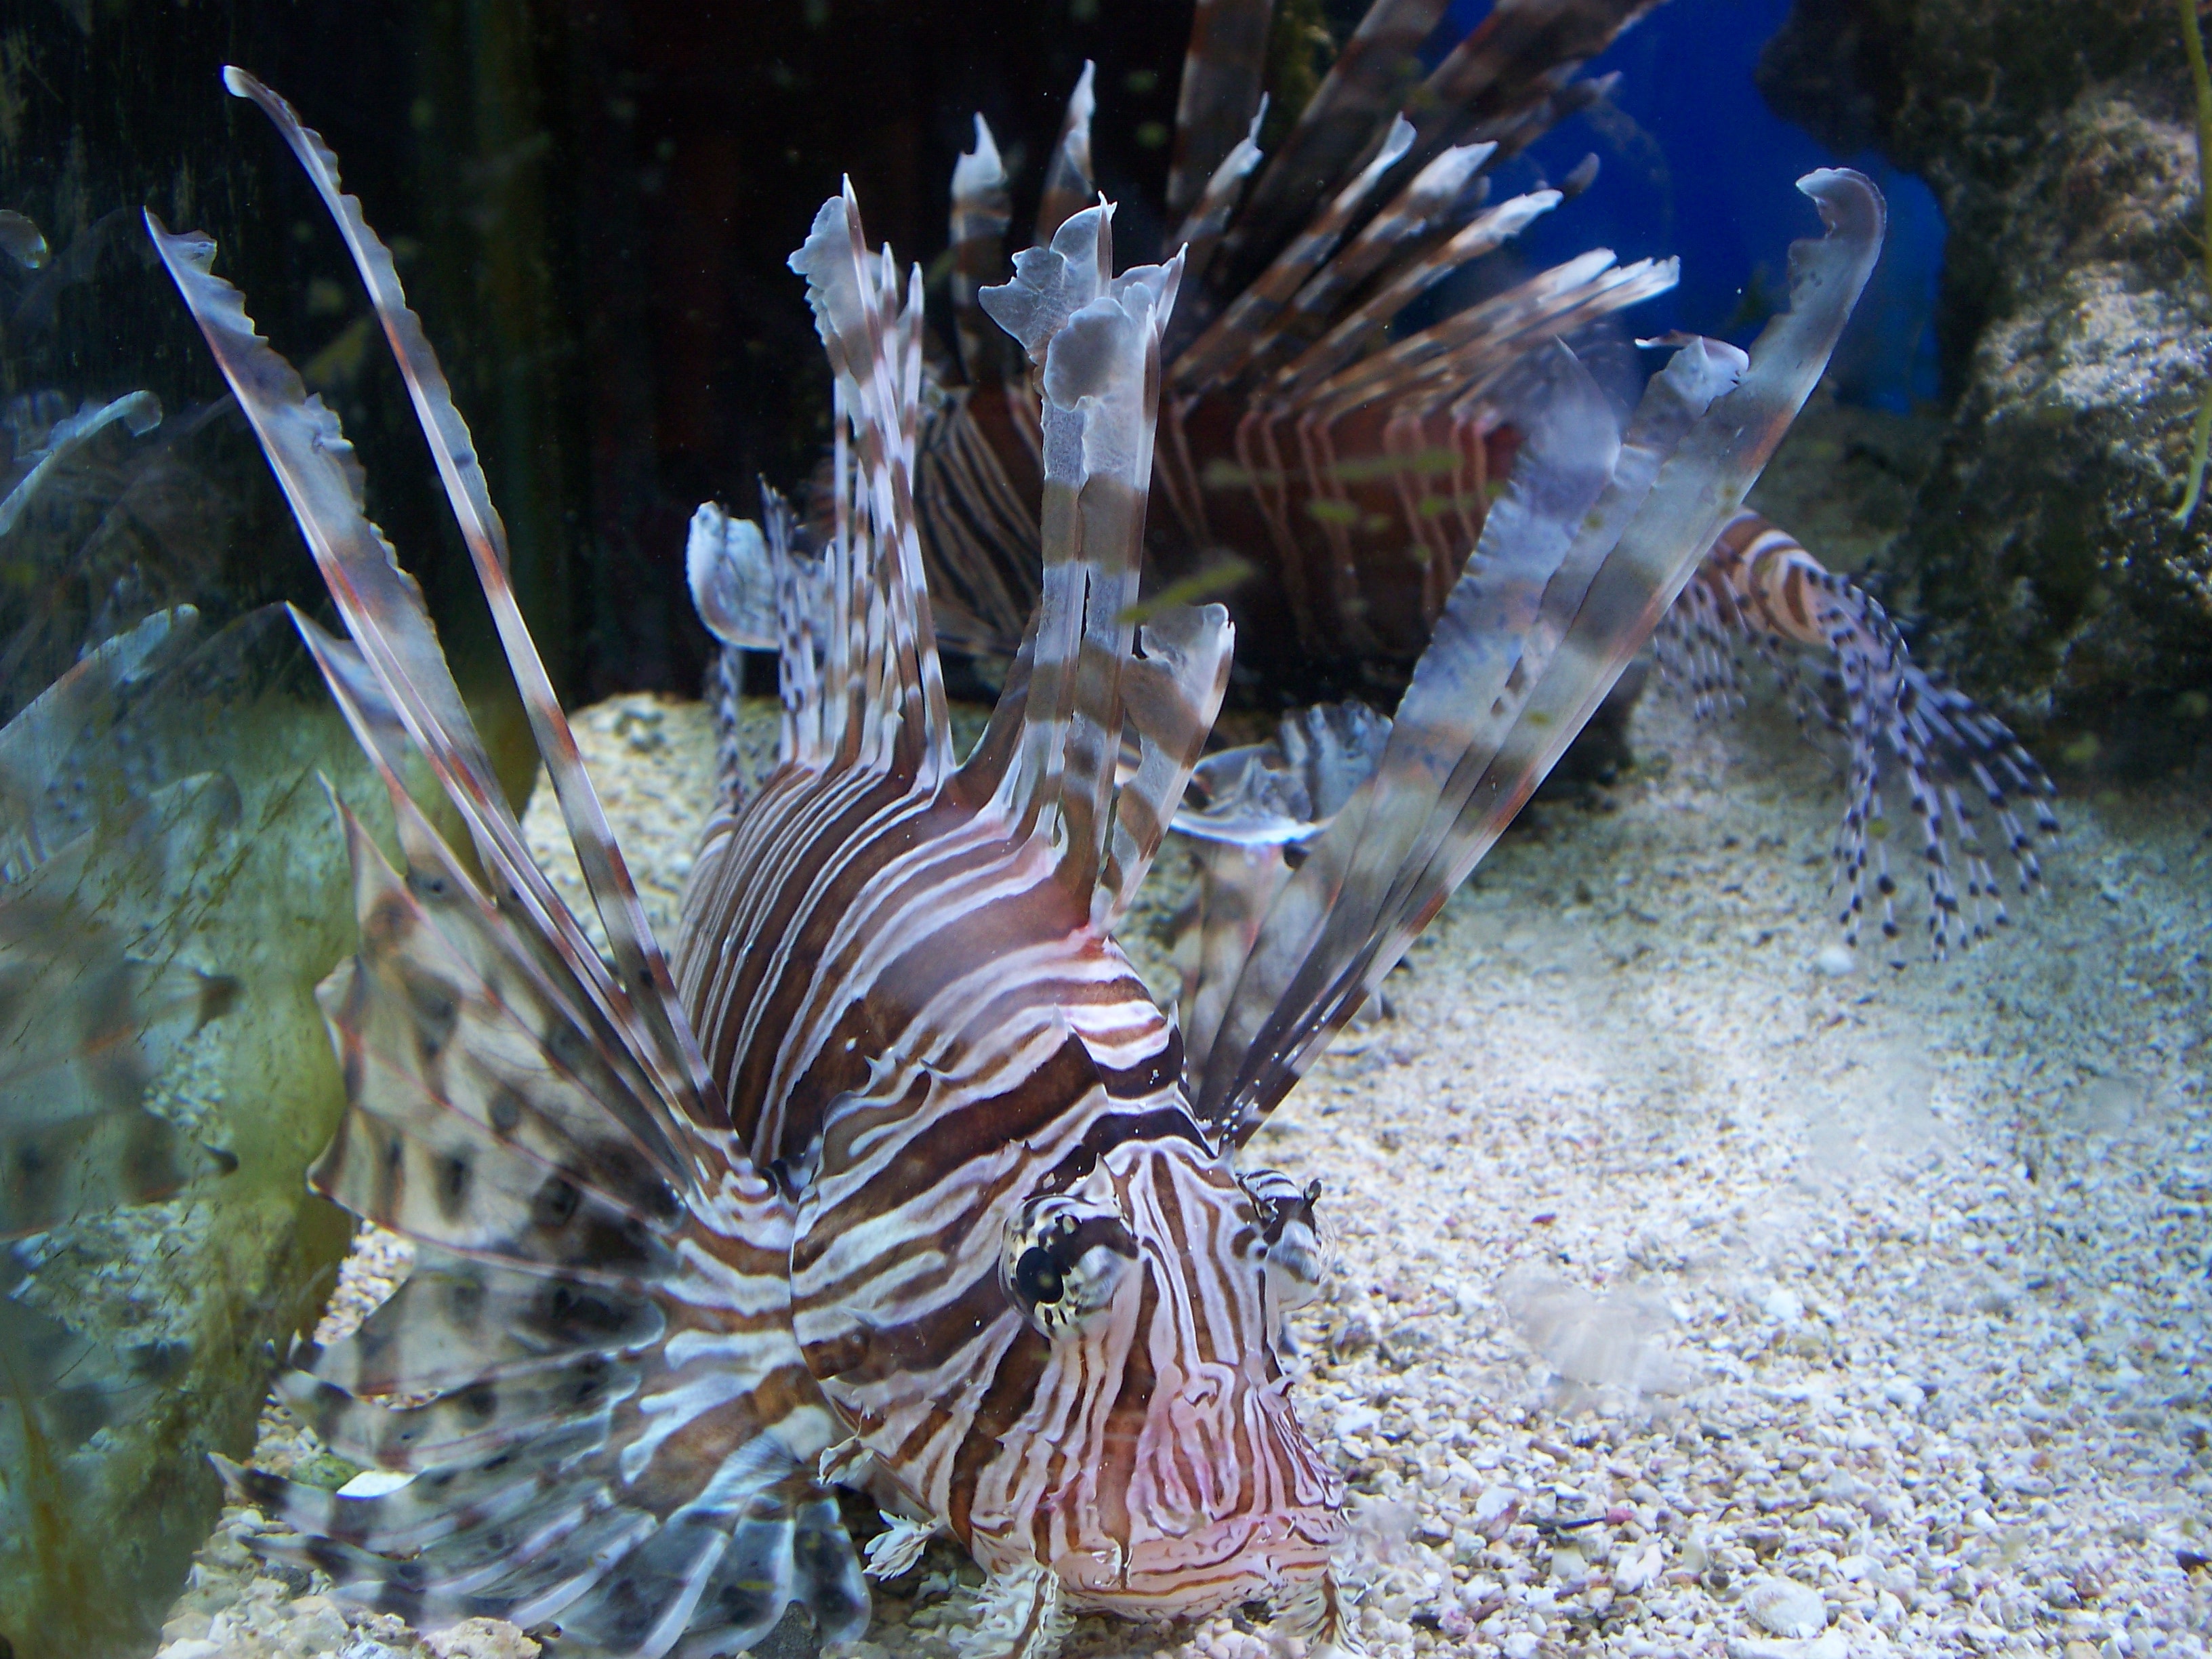 Beware the exotic lion fish. Not only does it crowd out native species, but its fins hide needle-sharp poisonous spikes.